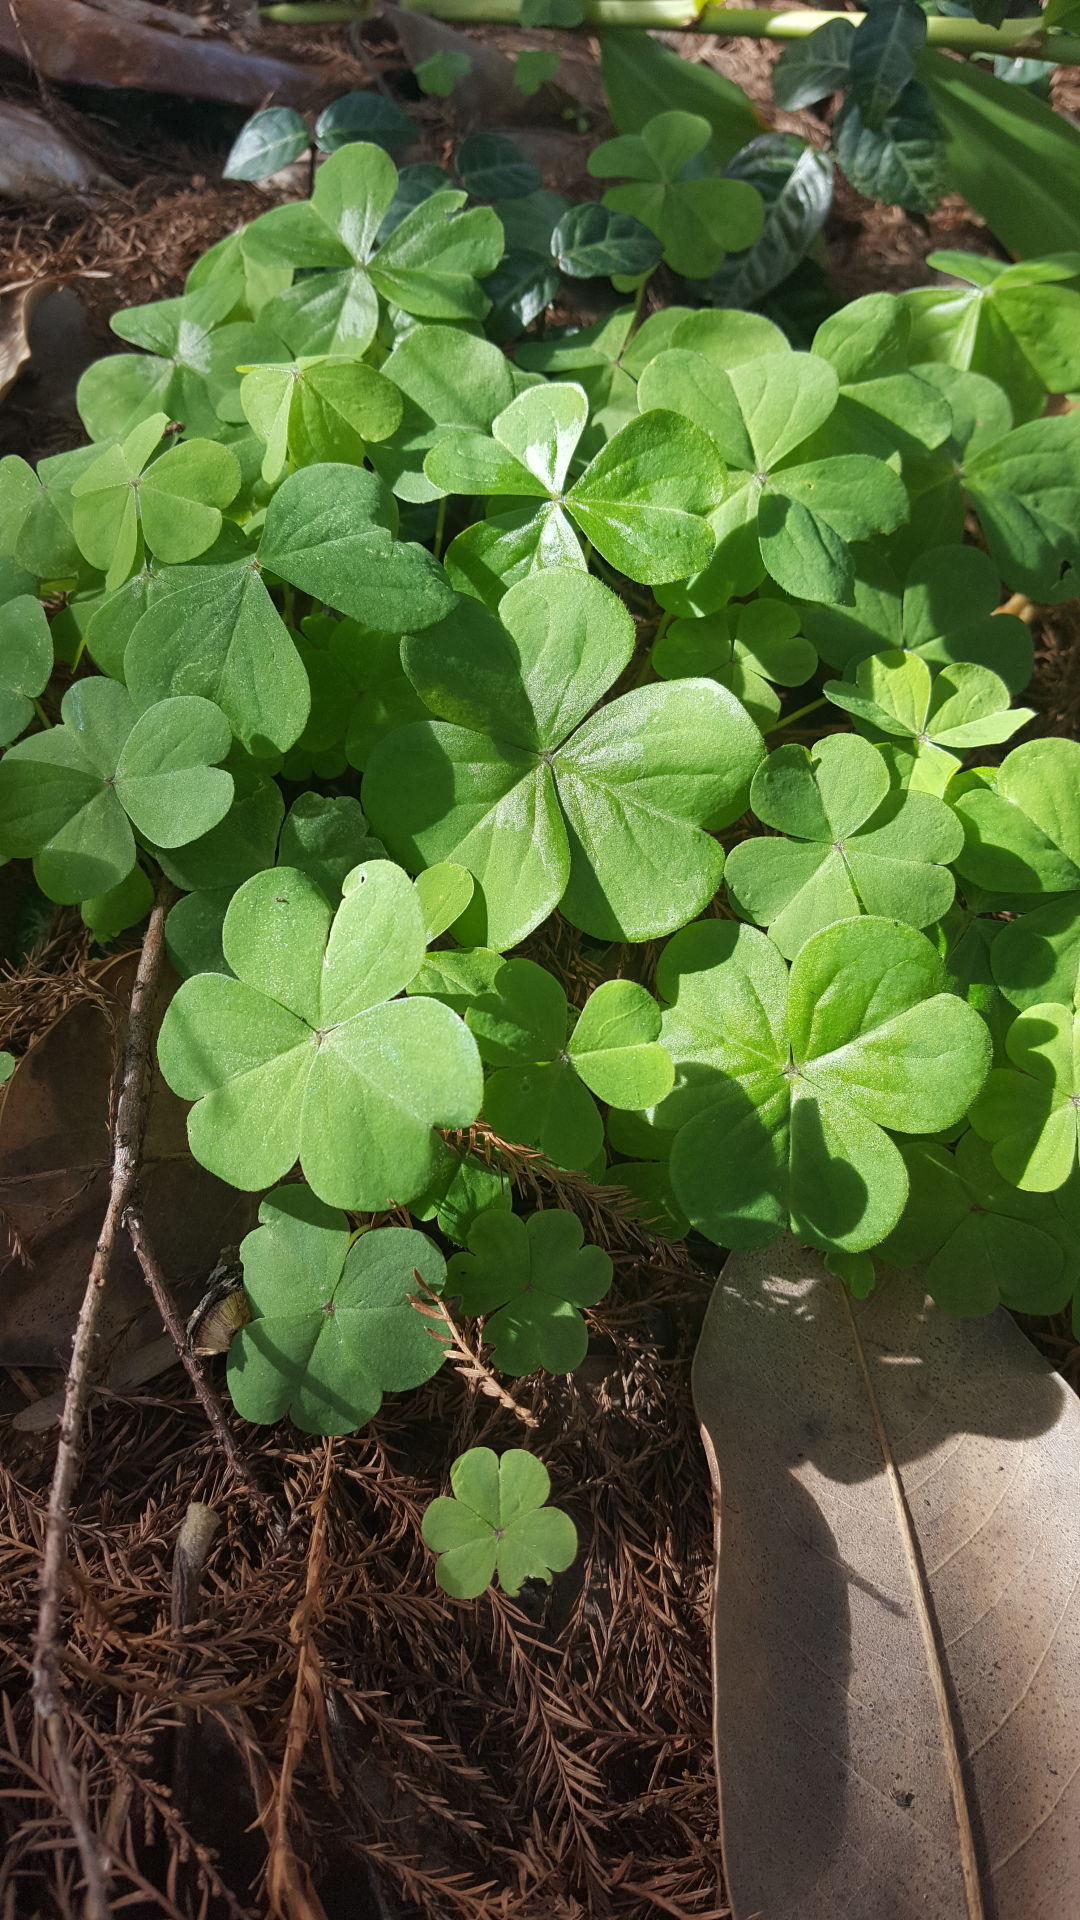 Garden News Oxalis Is A Pesky Weed That Takes Perseverance To Beat Home Garden Theadvocate Com